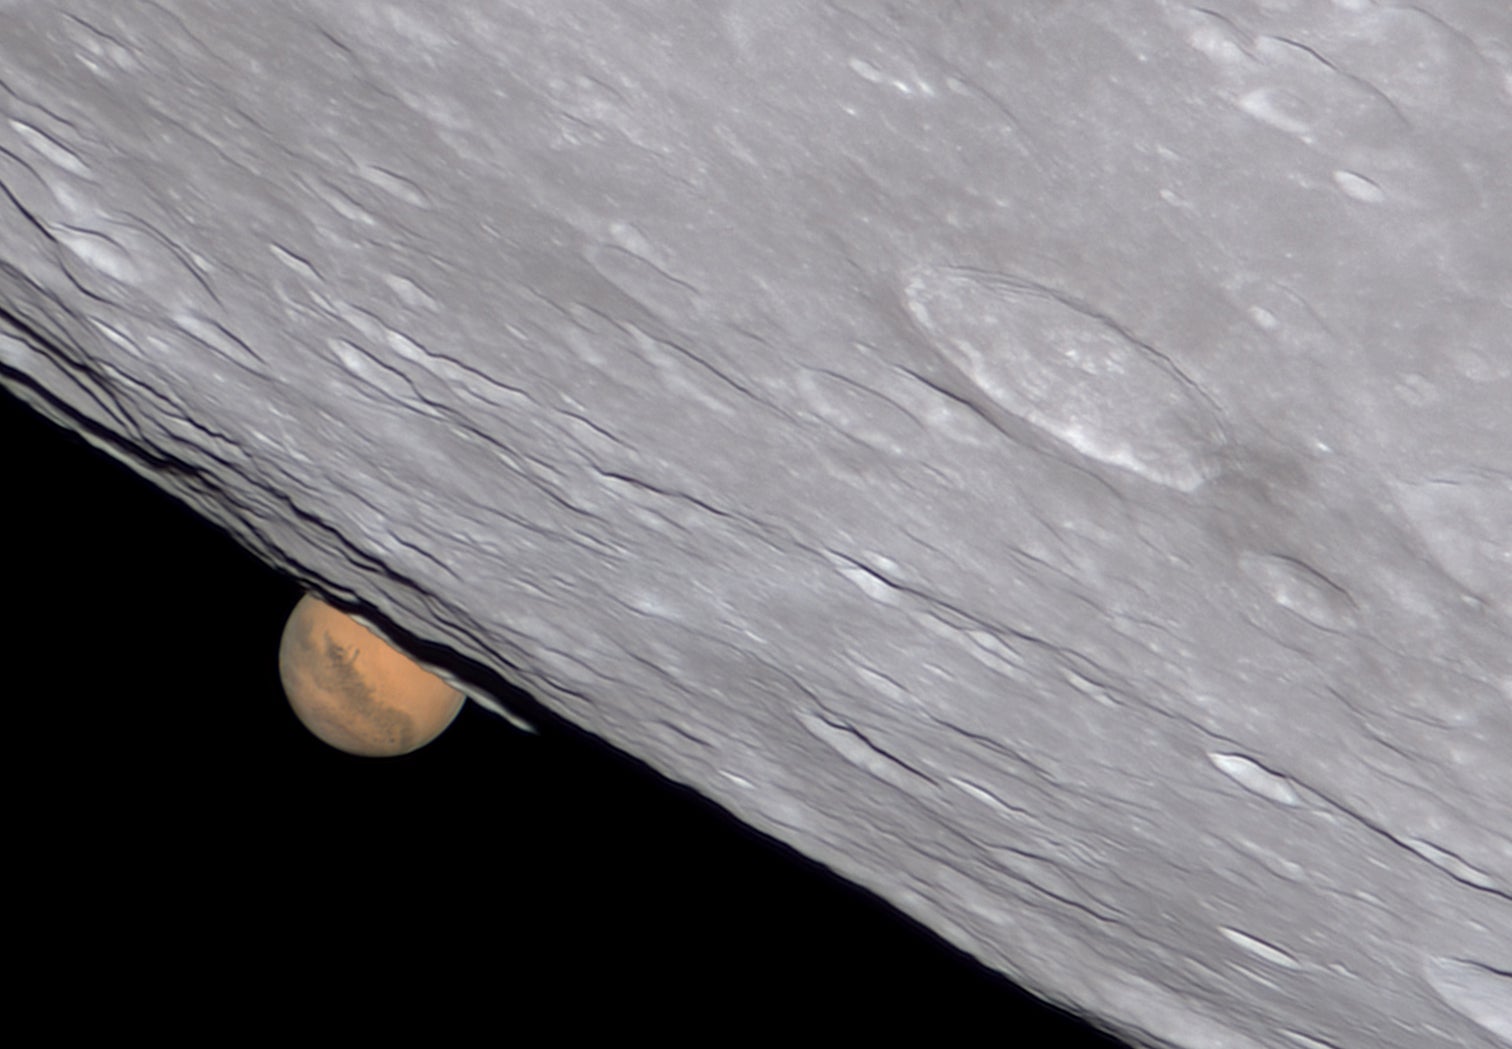 Closeup of the moon with mars peeking out behind smaller